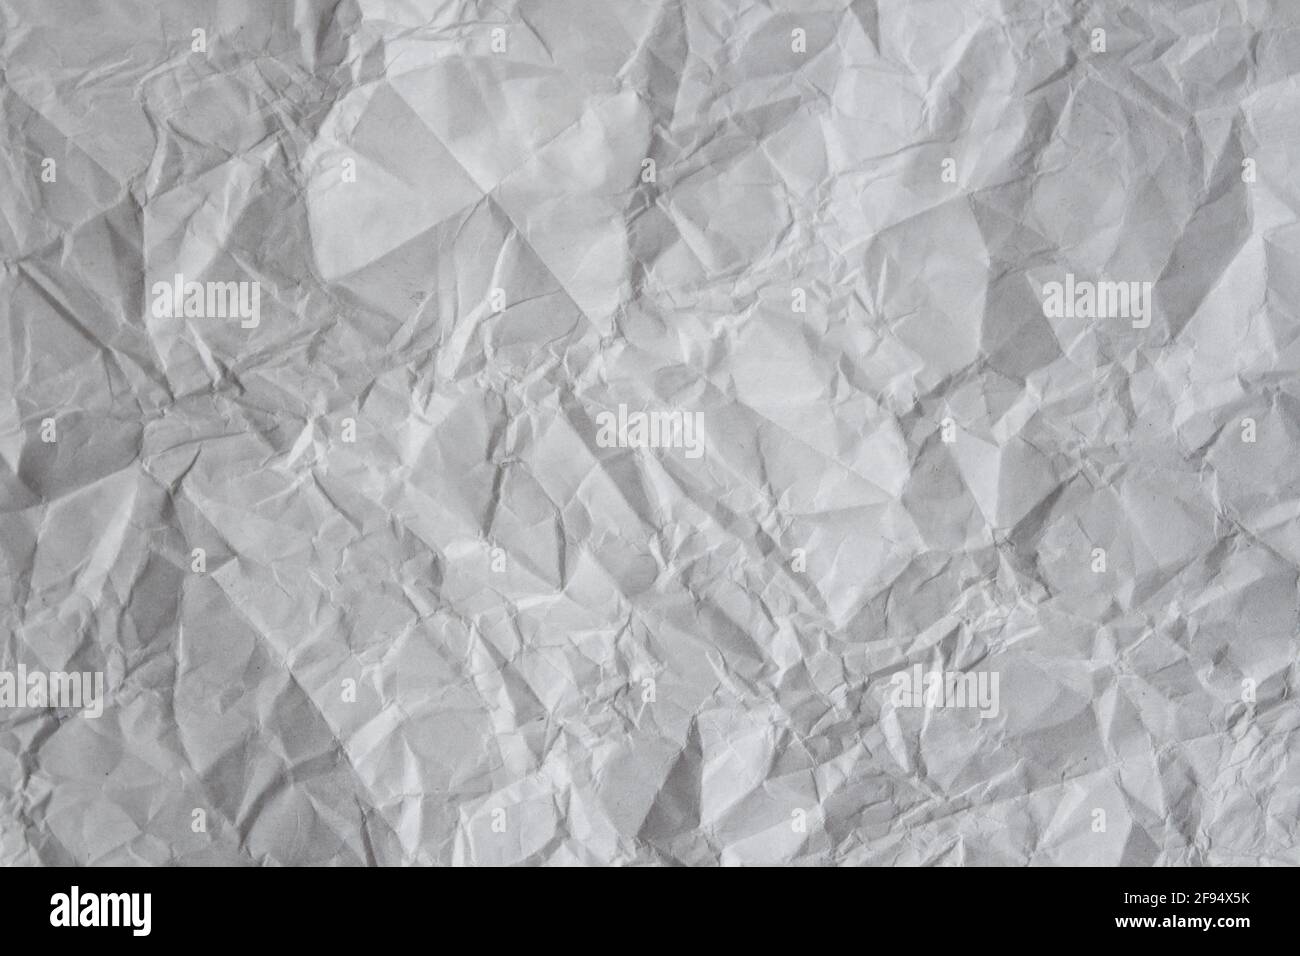 https://c8.alamy.com/comp/2F94X5K/gray-background-crumpled-paper-sheet-background-blank-creased-paper-texture-2F94X5K.jpg